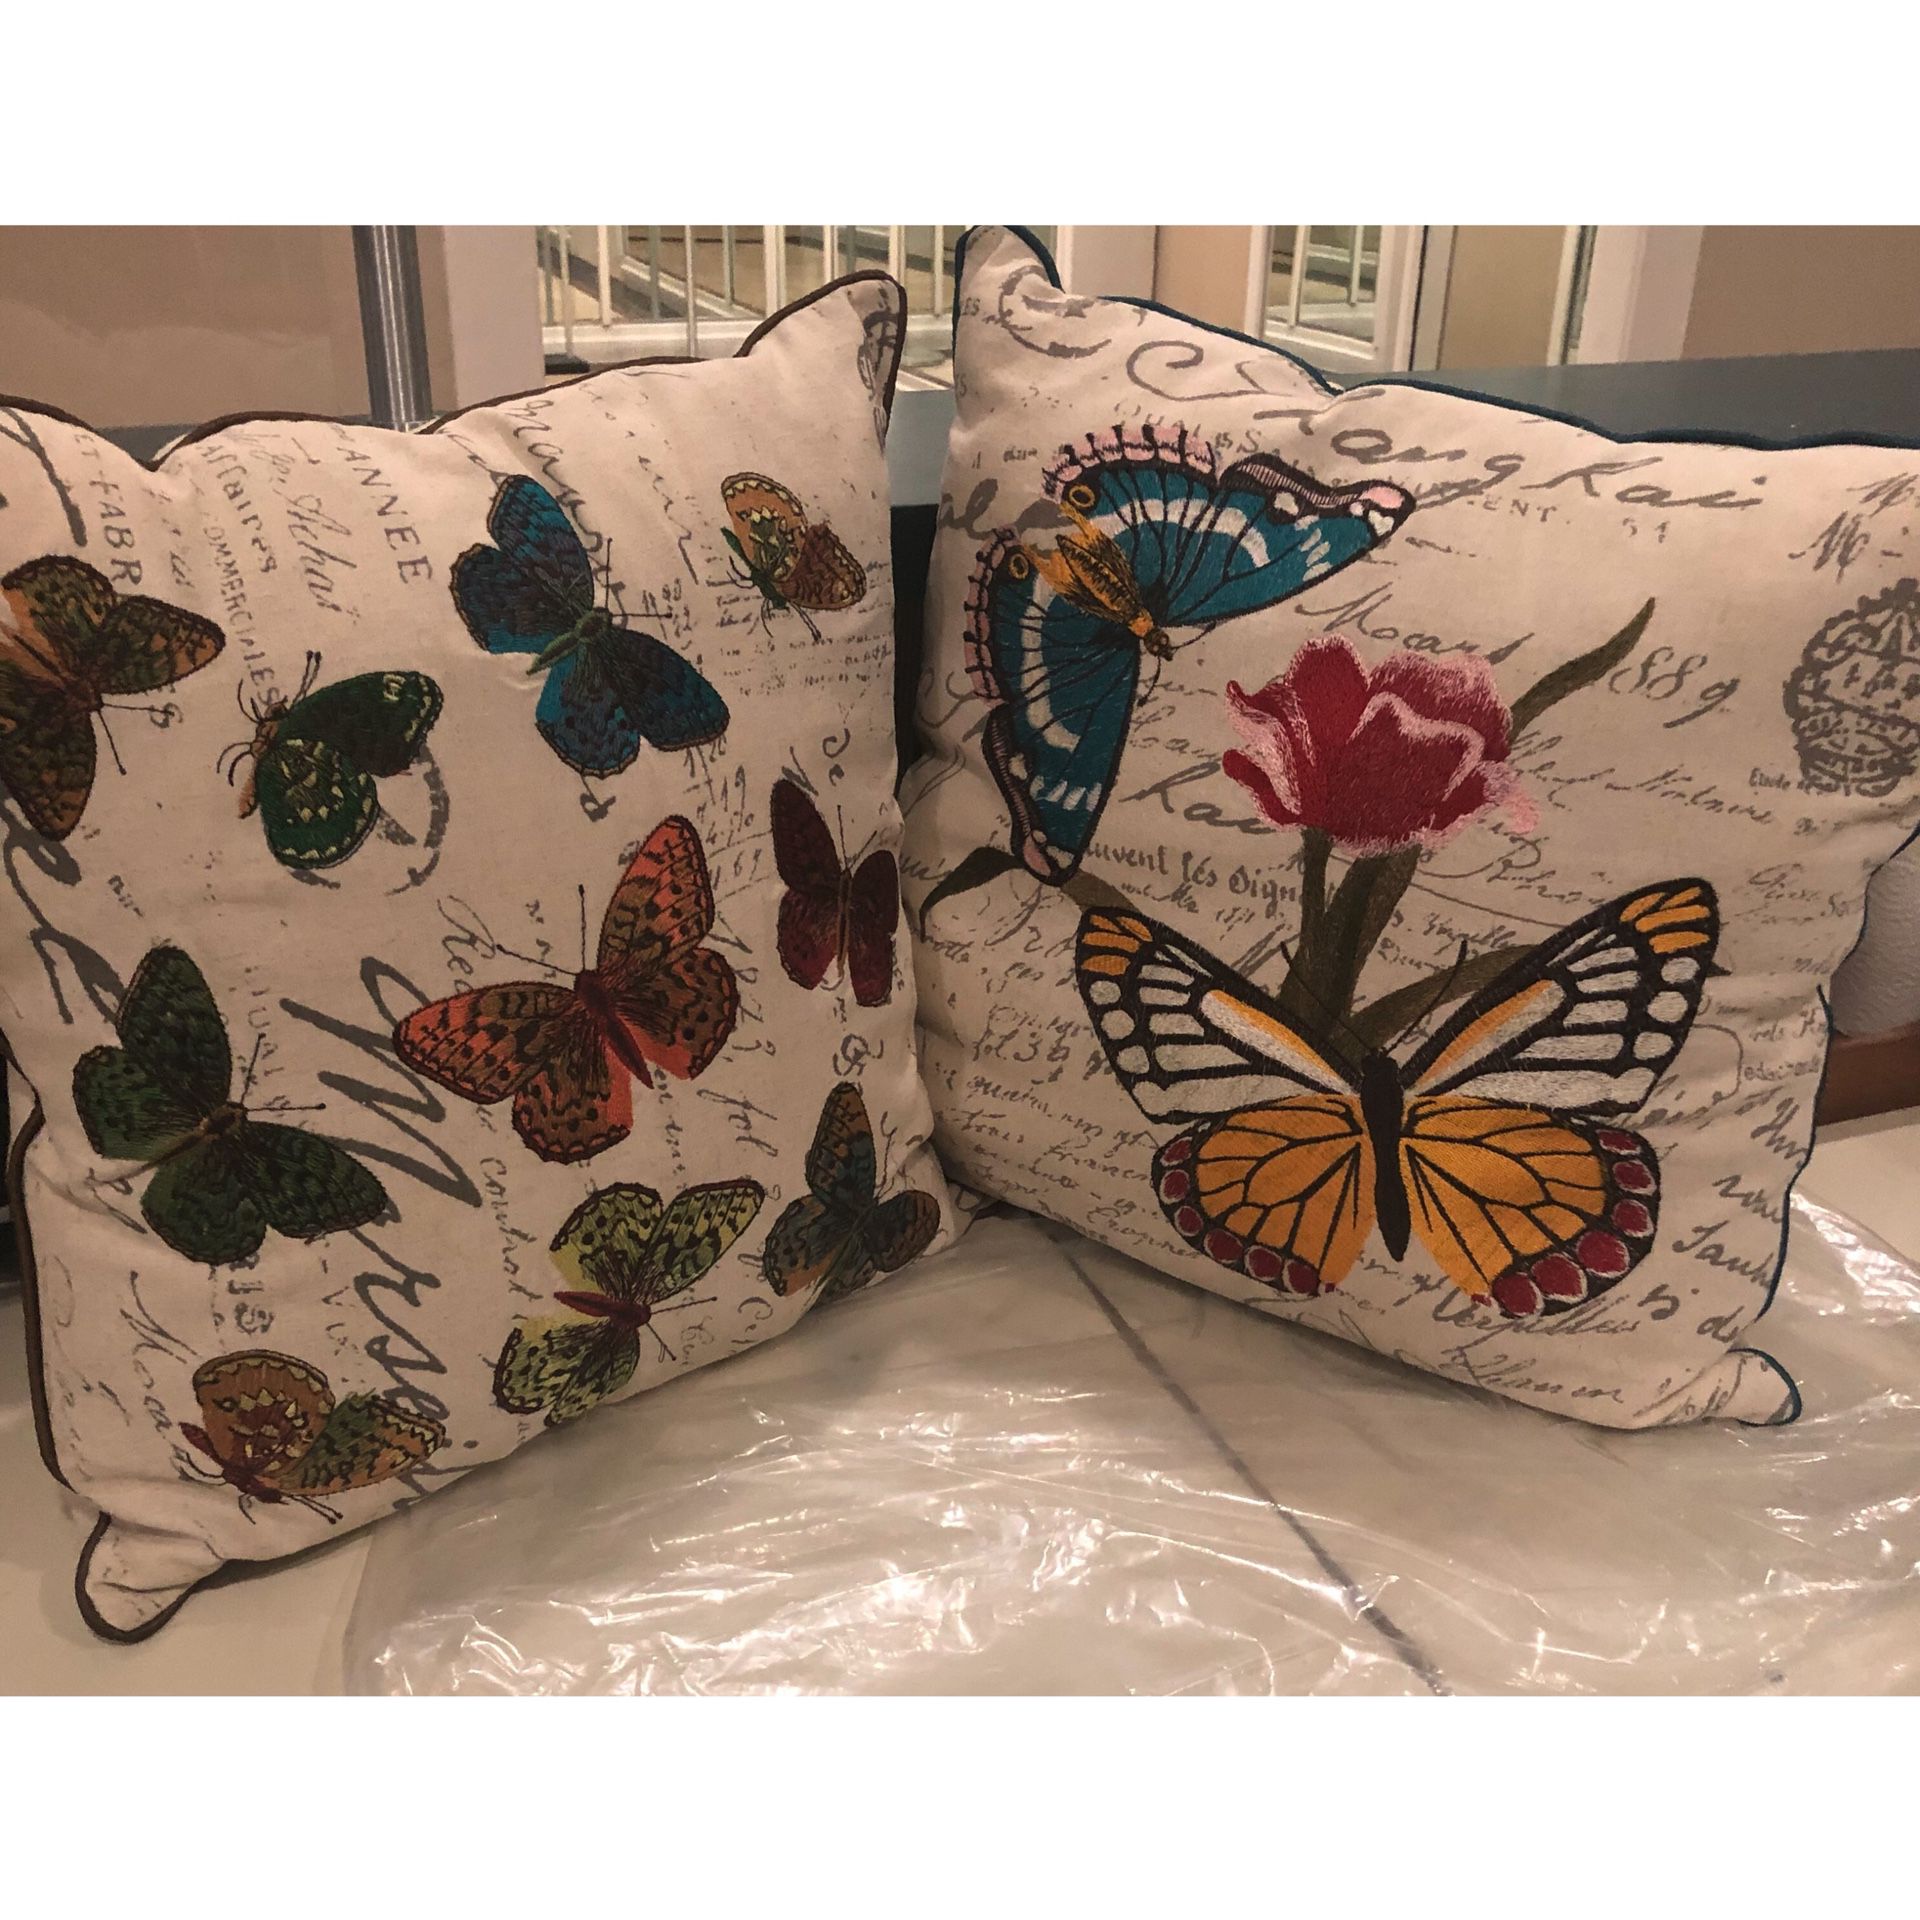 PIER 1 (2) Embroidered Butterfly Pillows